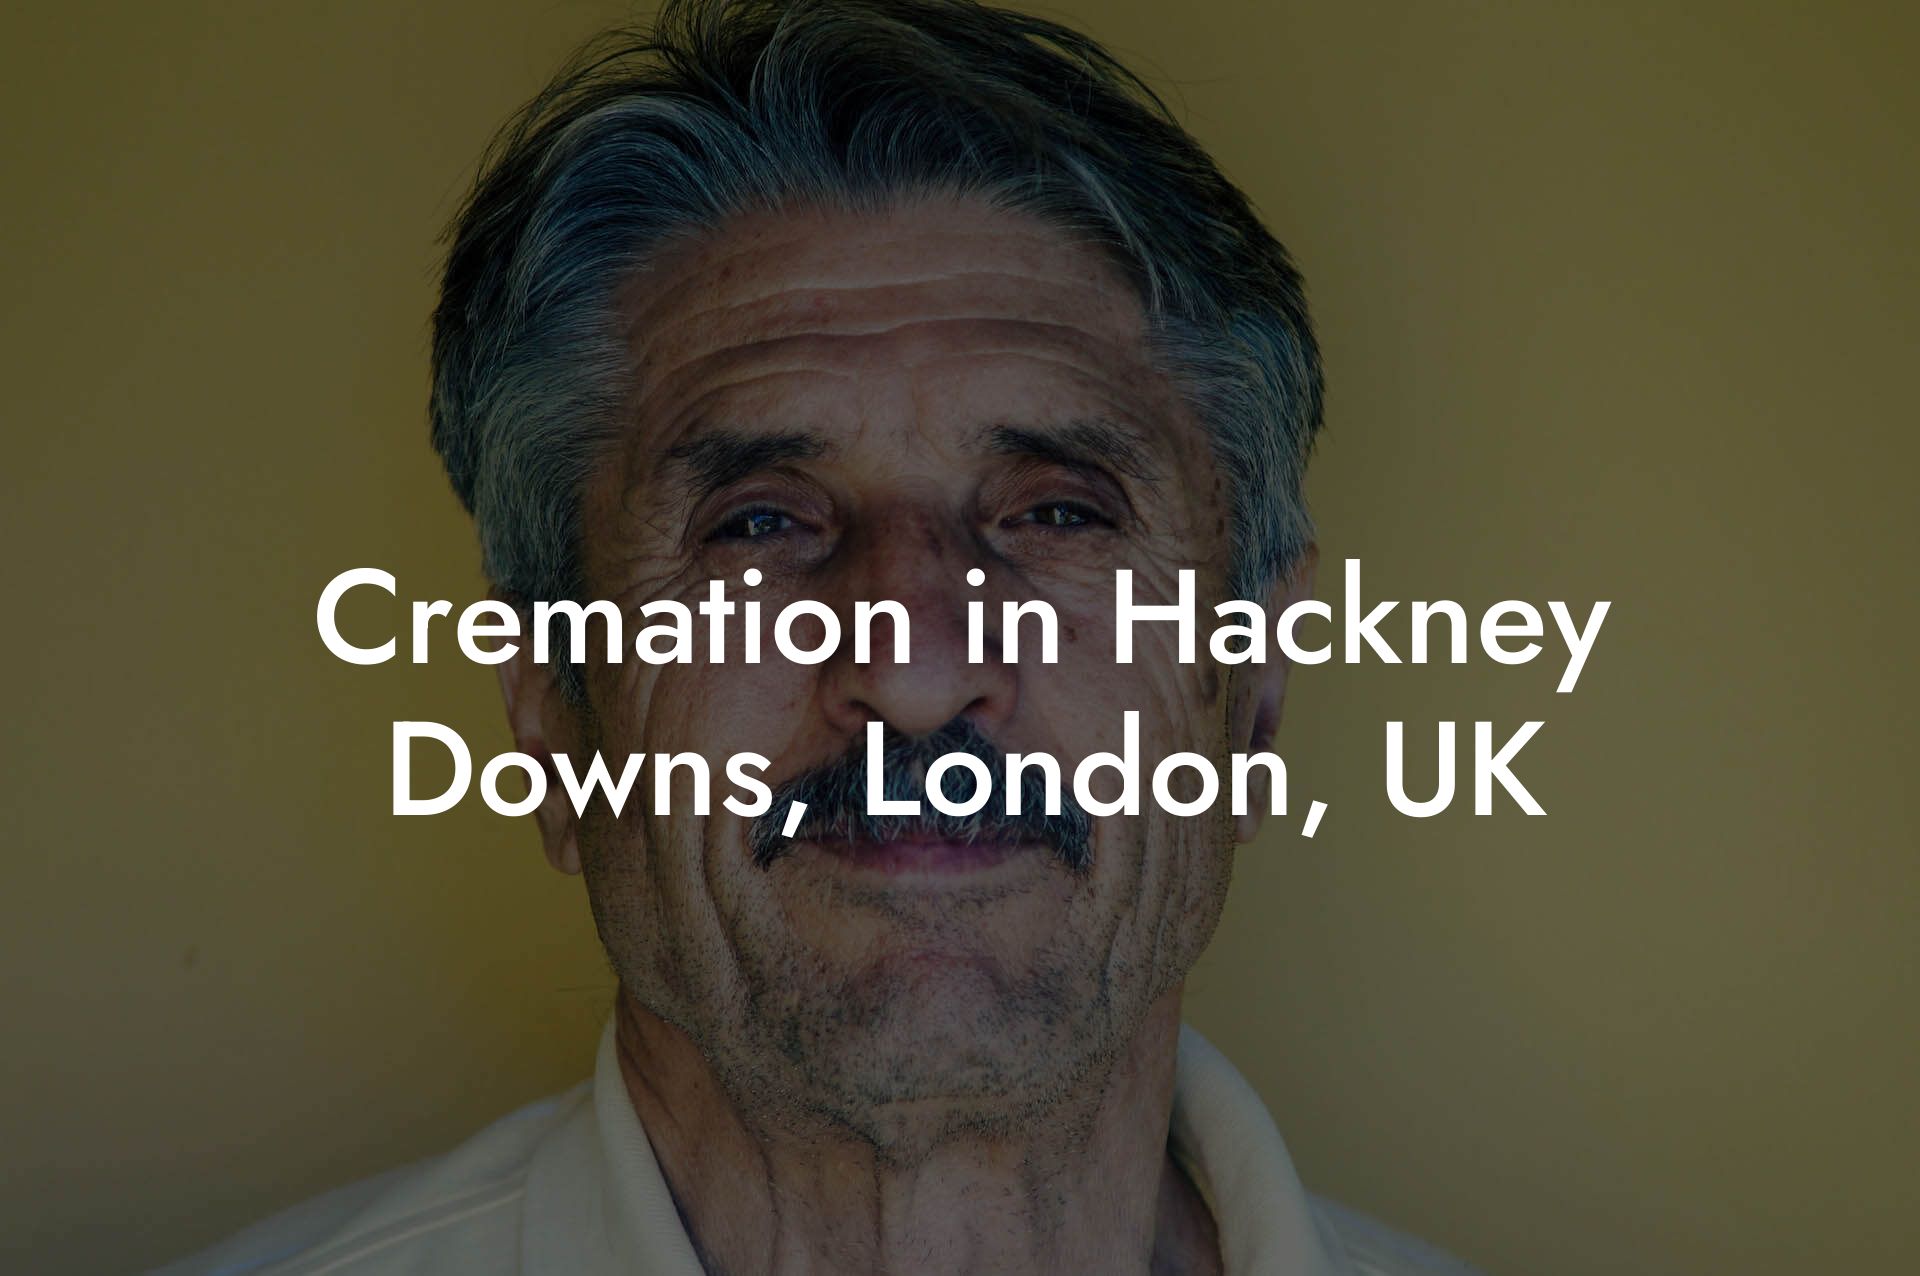 Cremation in Hackney Downs, London, UK